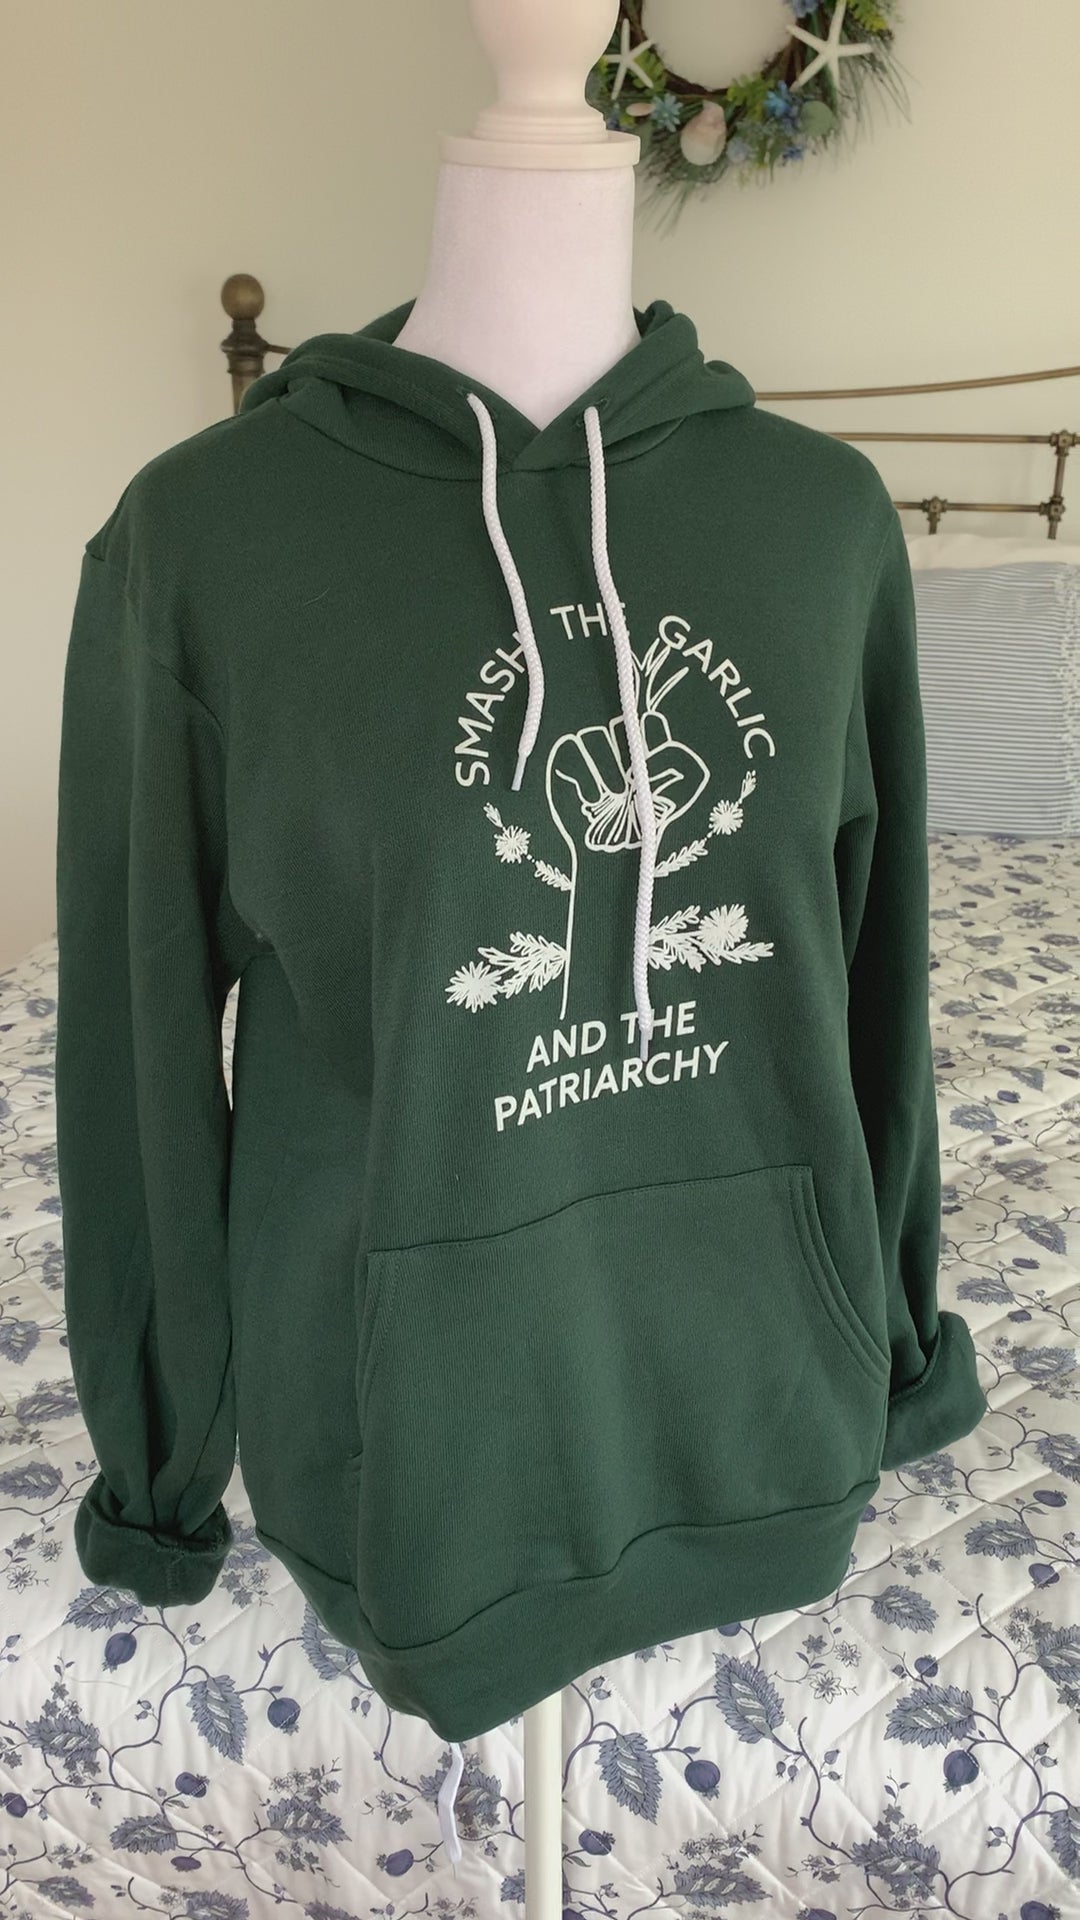 A dark green hoodie that reads "Smash the Garlic and the Patriarchy" hangs on a manikin" 